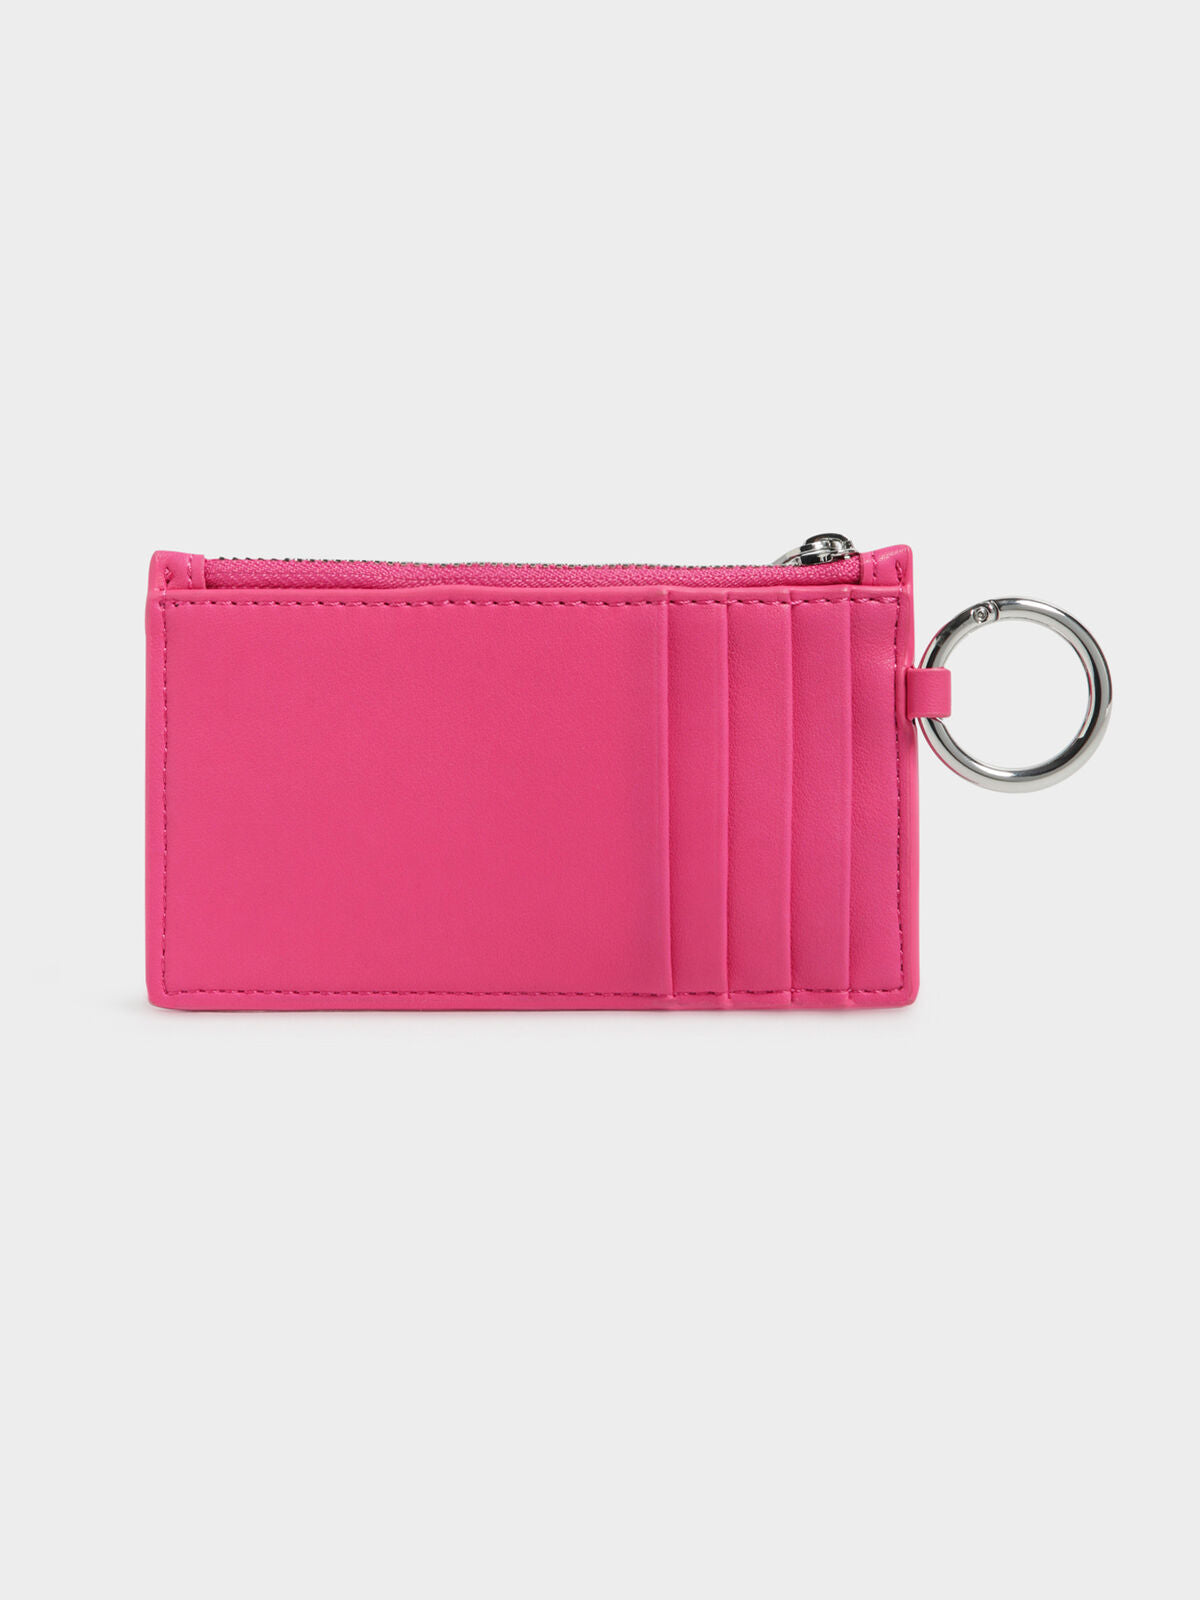 Femme Pouch Card Holder Wallet in Fuchsia Pink